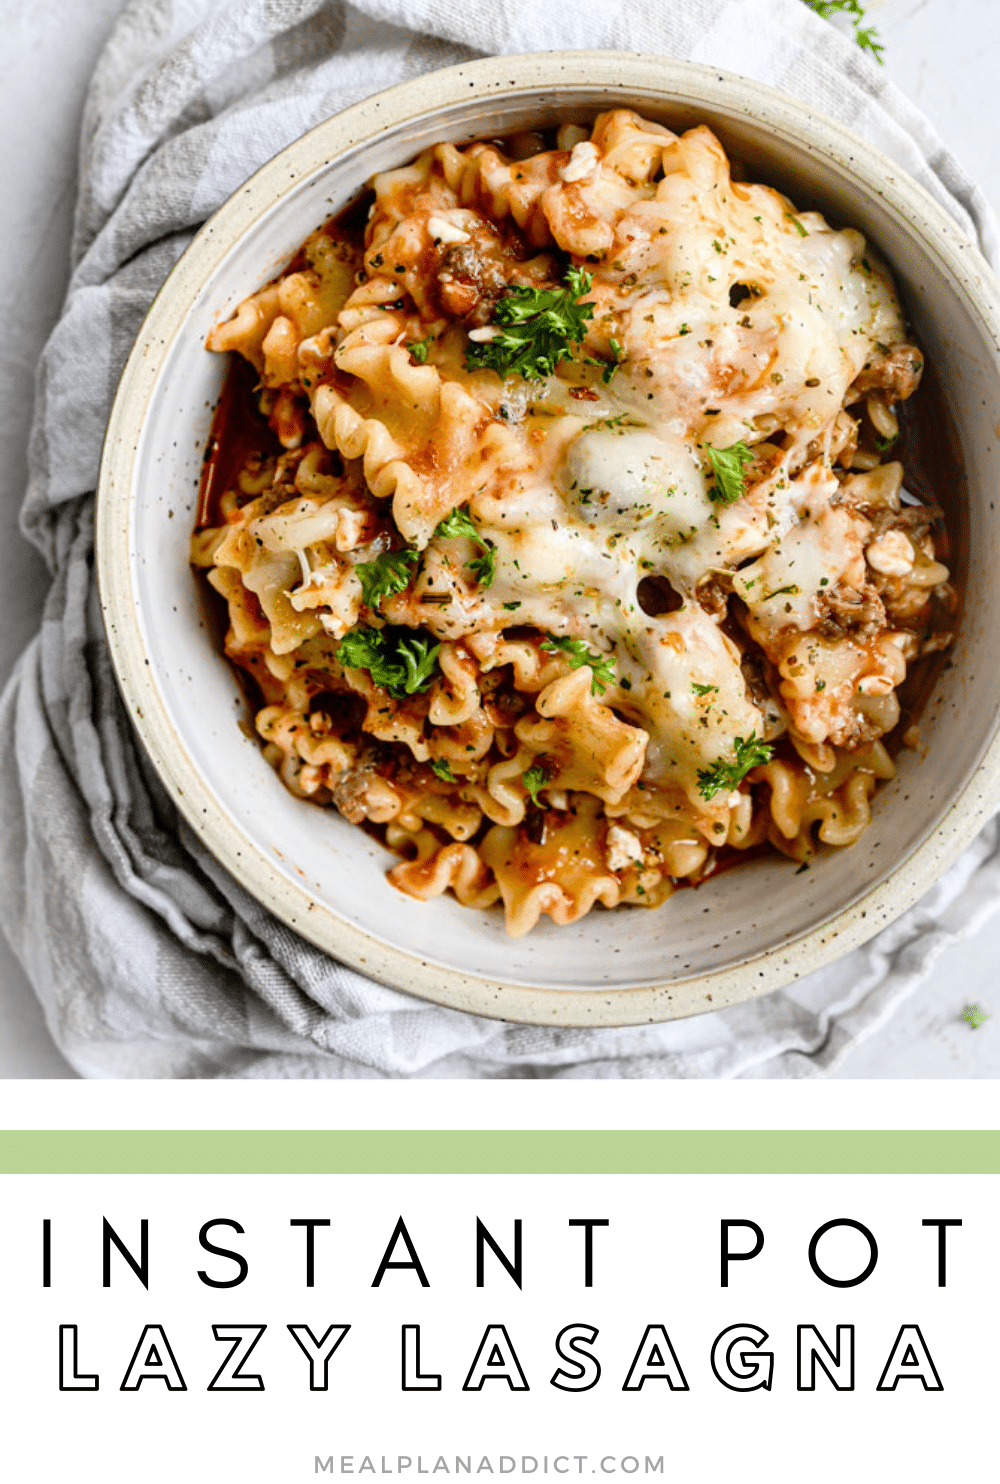 Family Dinner Made Easy with This Instant Pot Lazy Lasagna